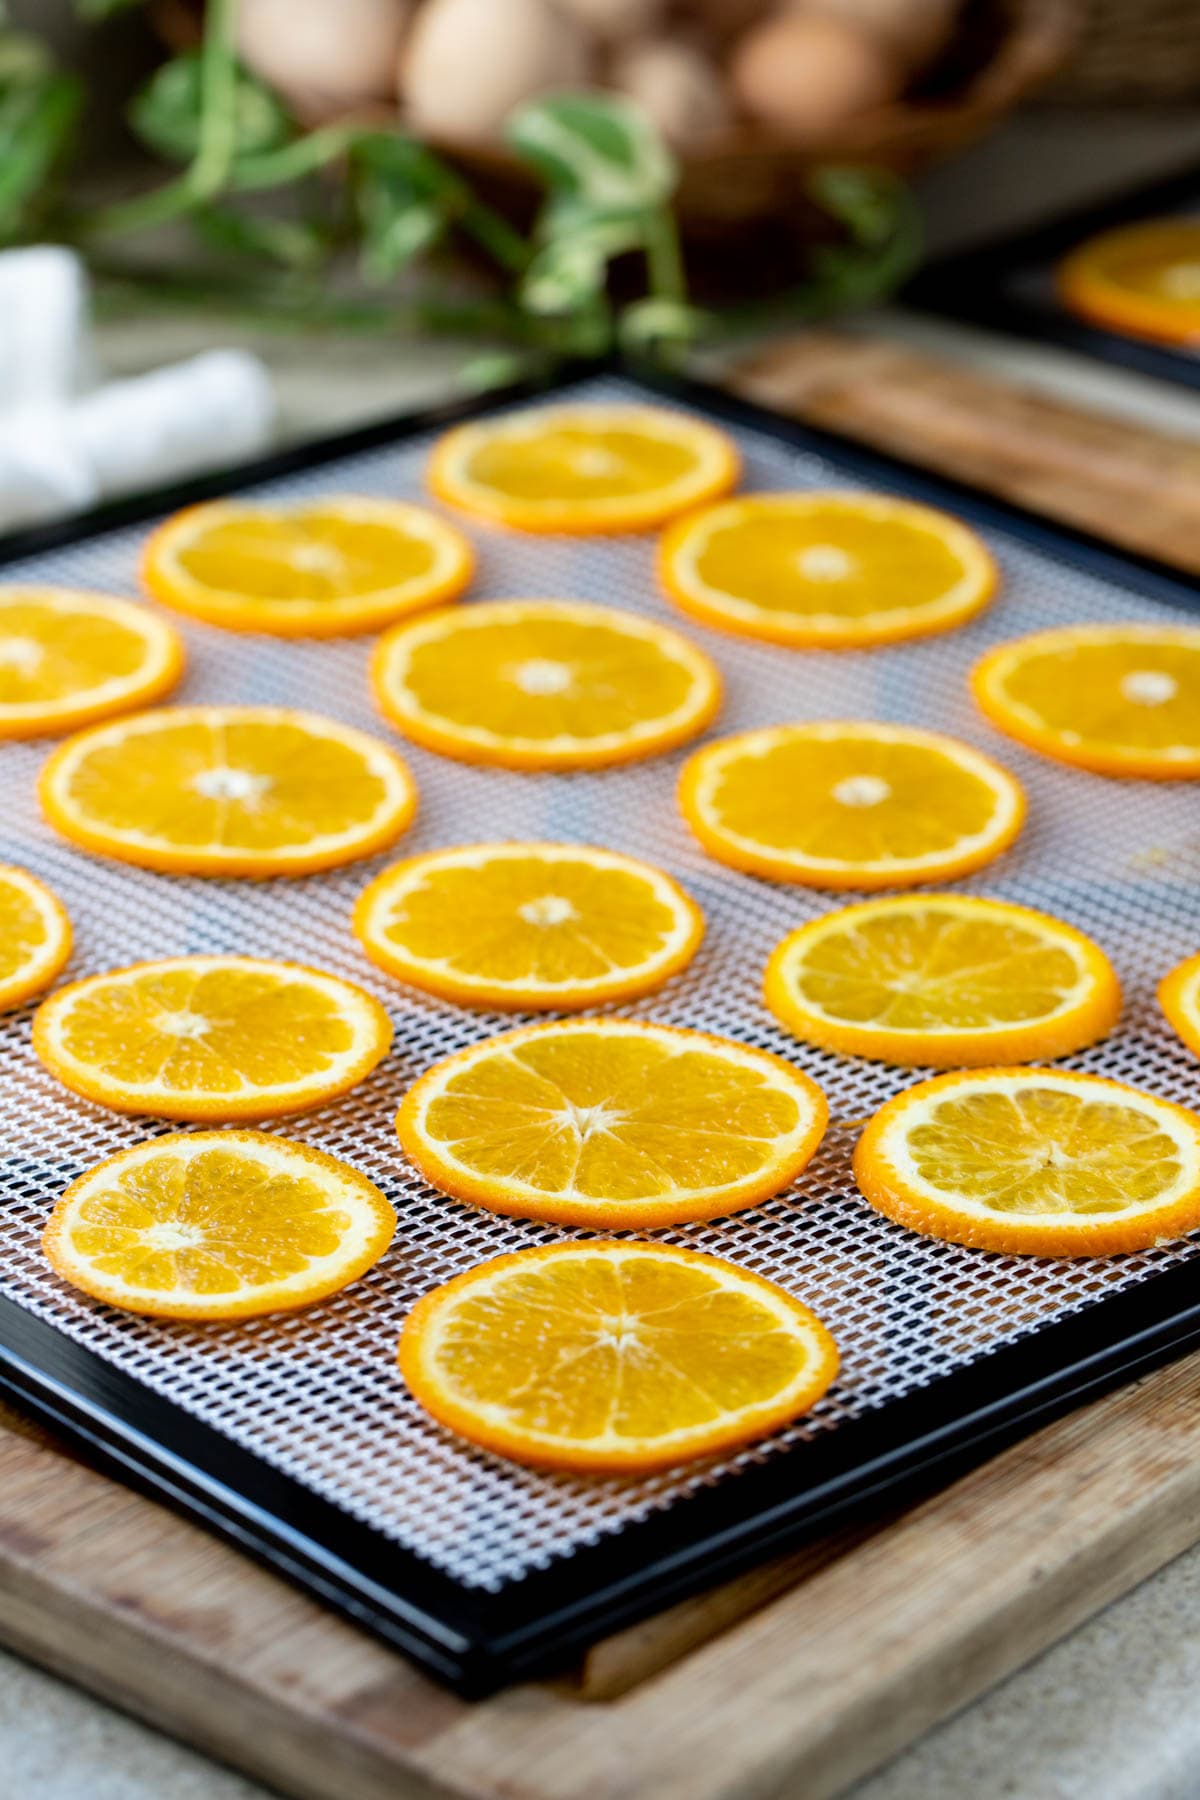 placing orange slices on the try of the dehydrator. 